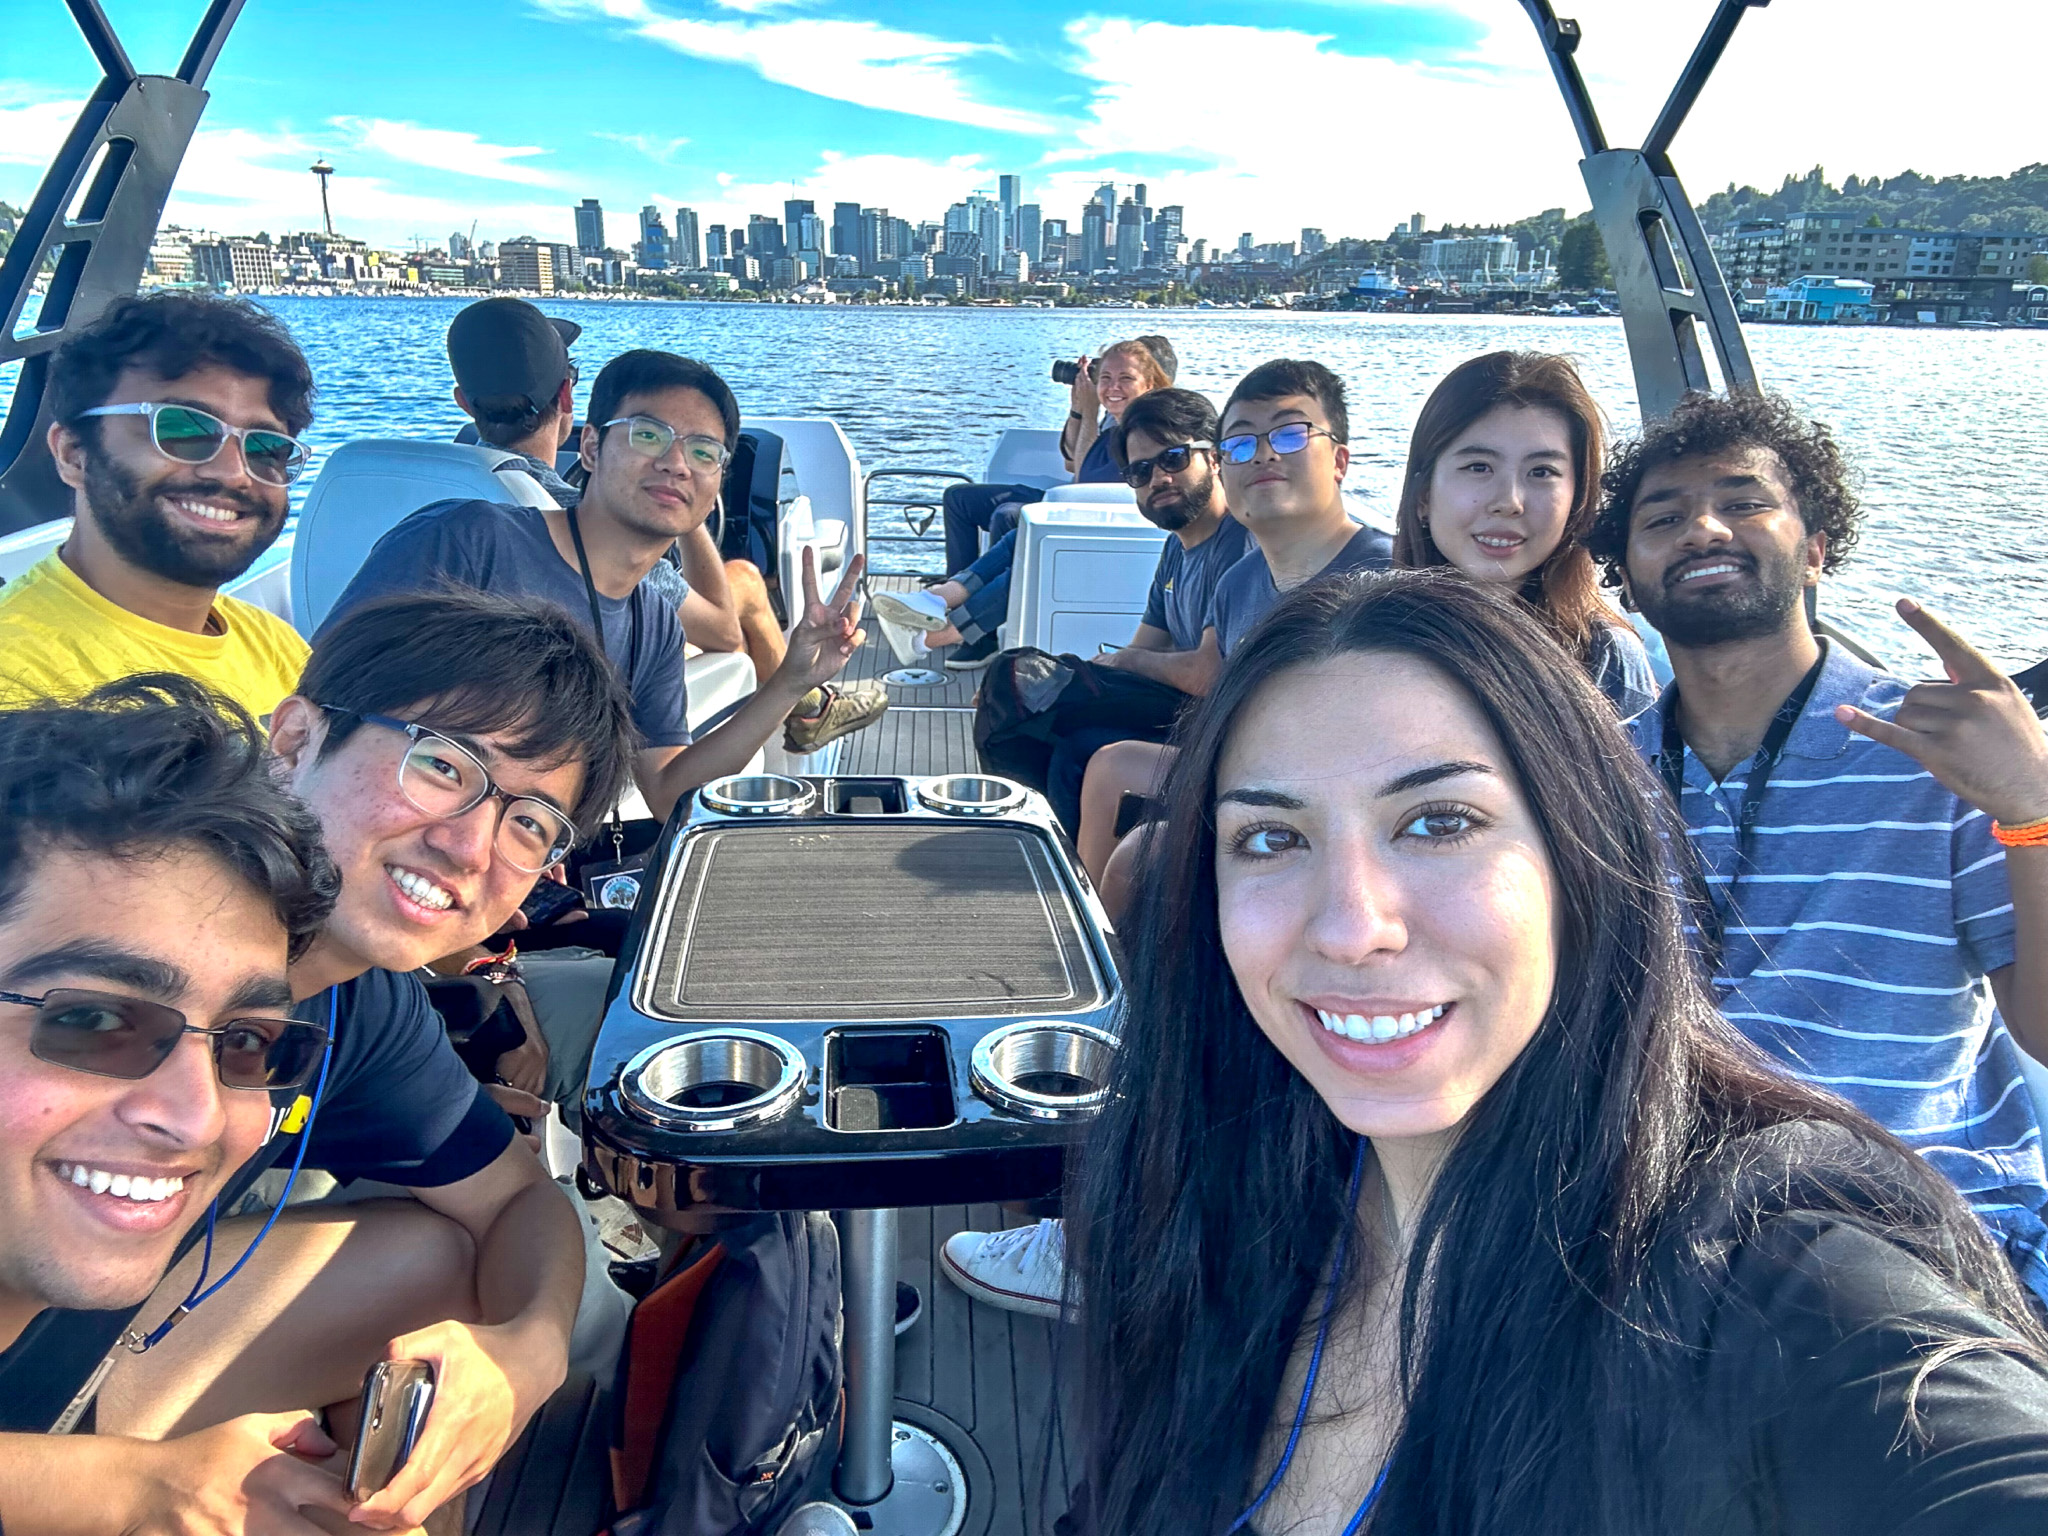 Students smile for a selfie on a watercraft during the Seattle Trek.